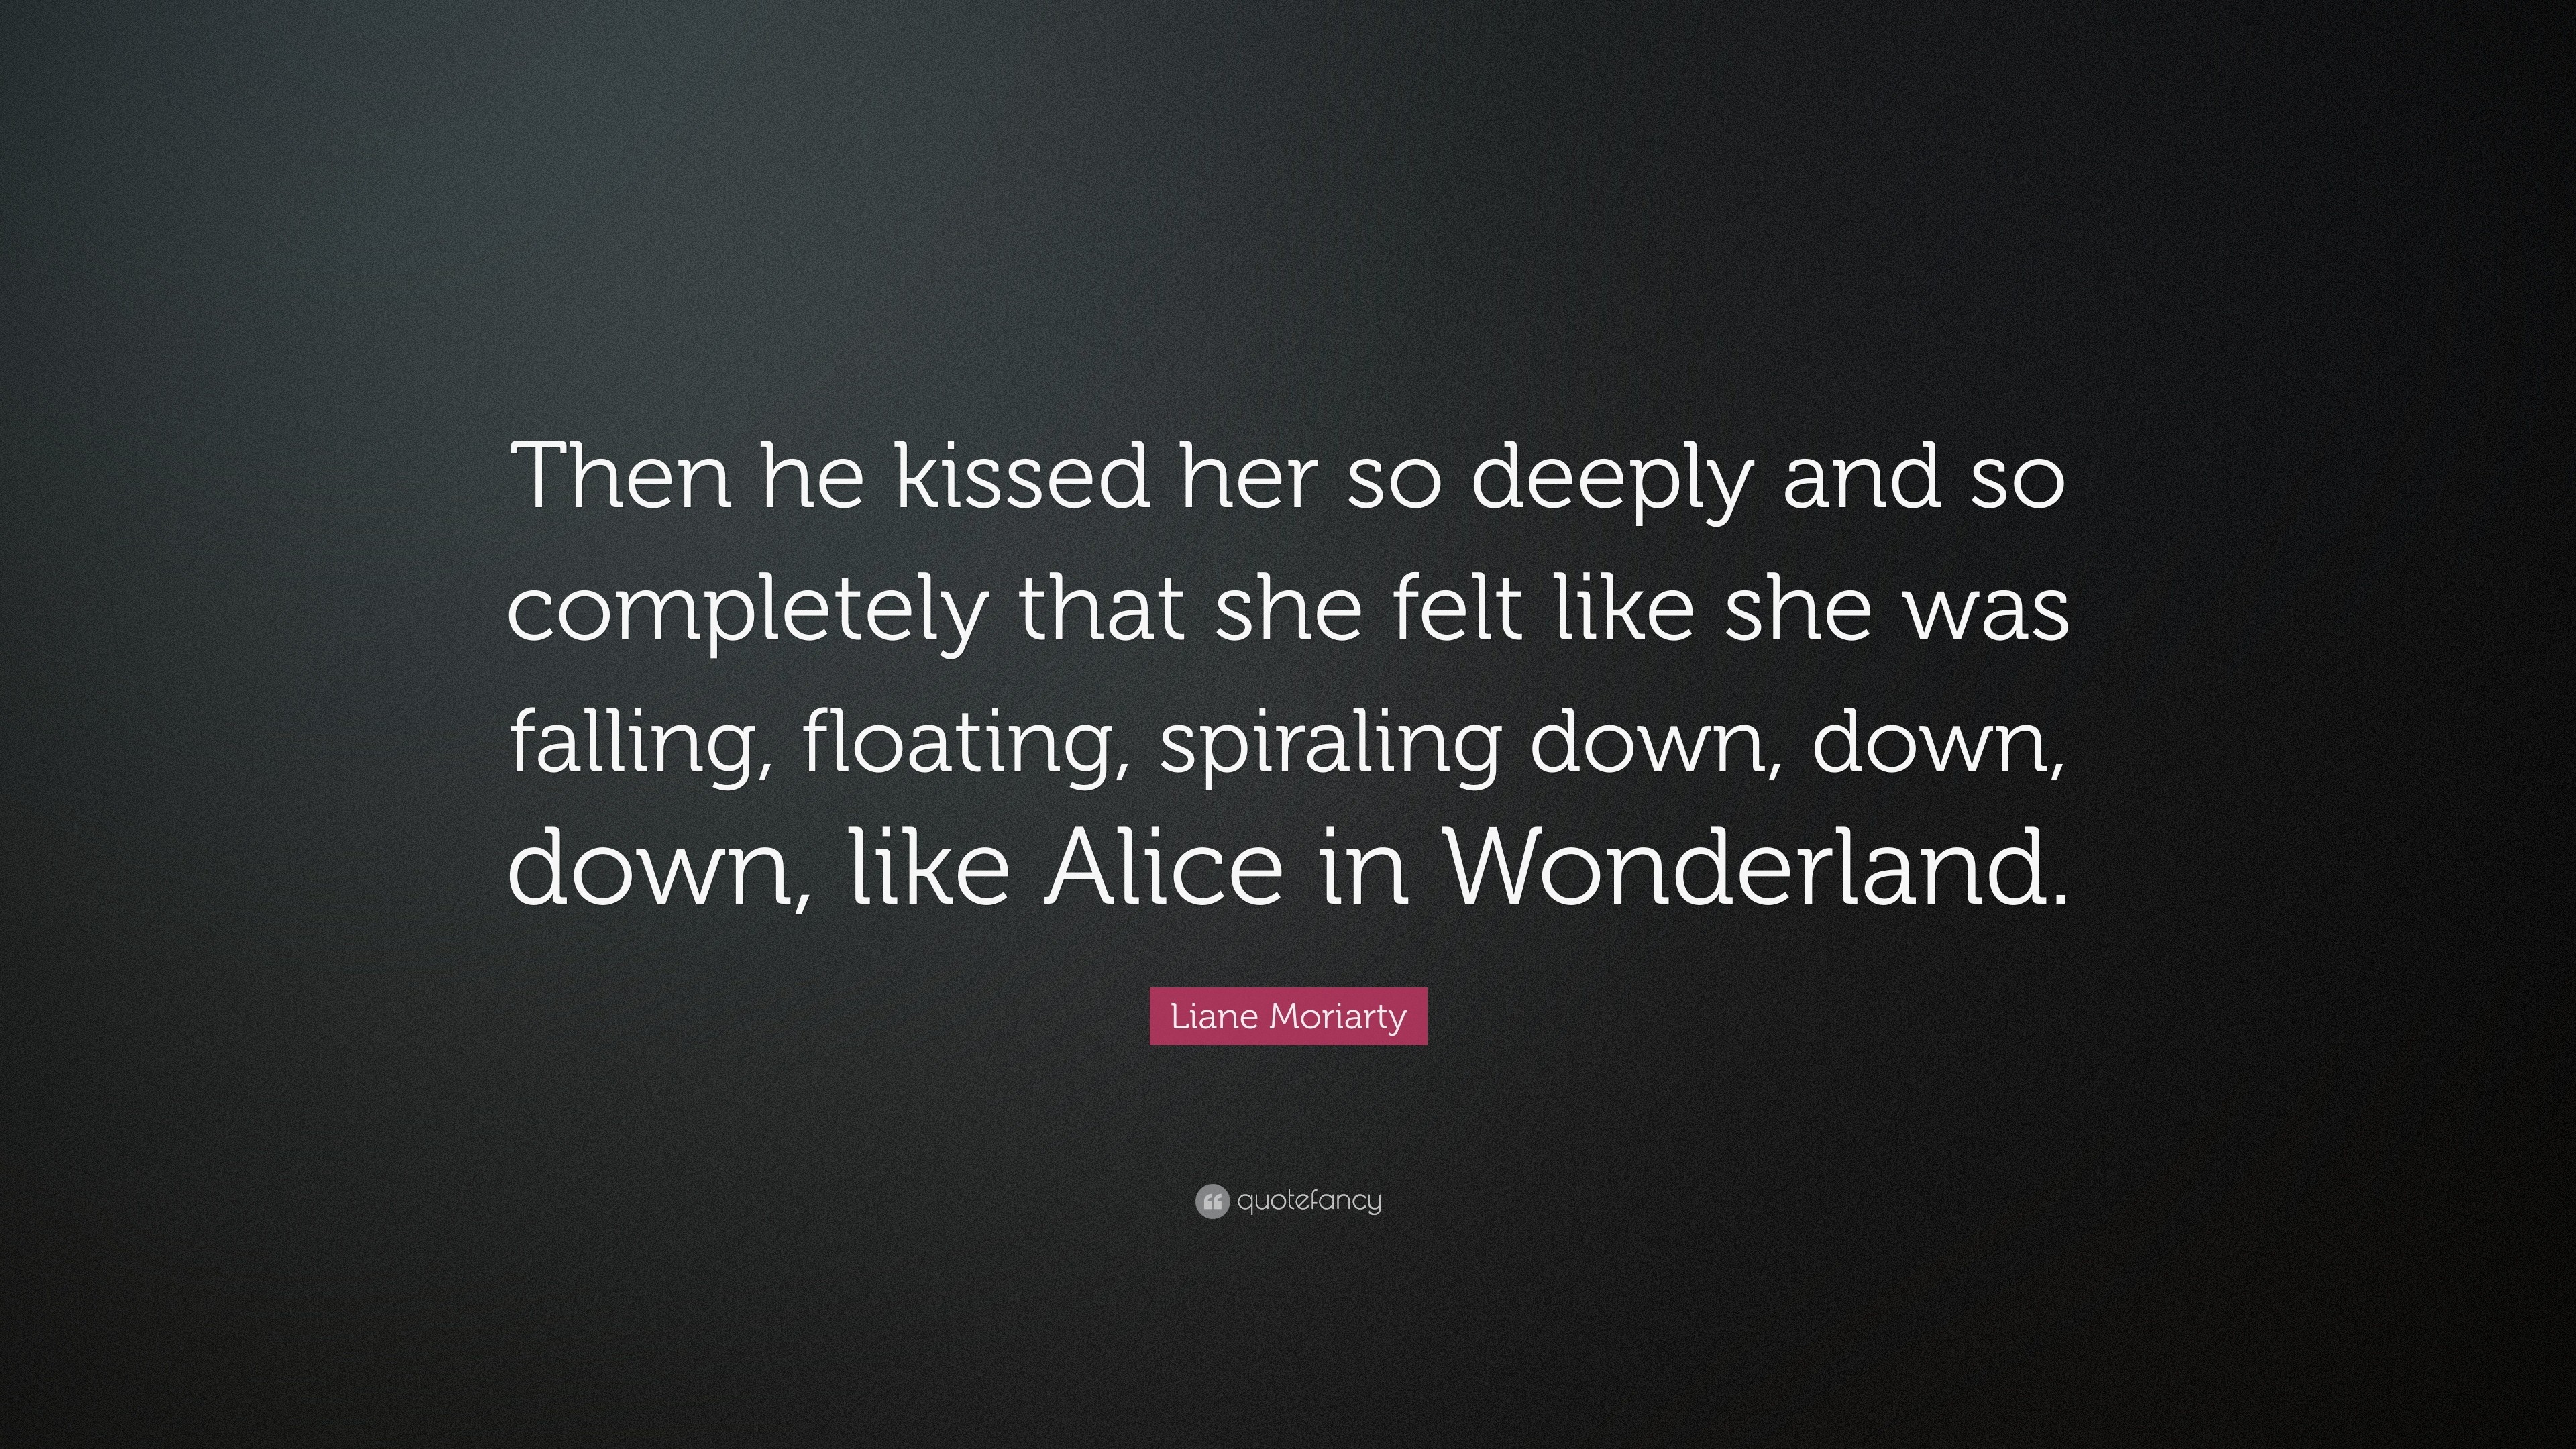 3840x2160 Liane Moriarty Quote: “Then he kissed her so deeply and so completely that  she